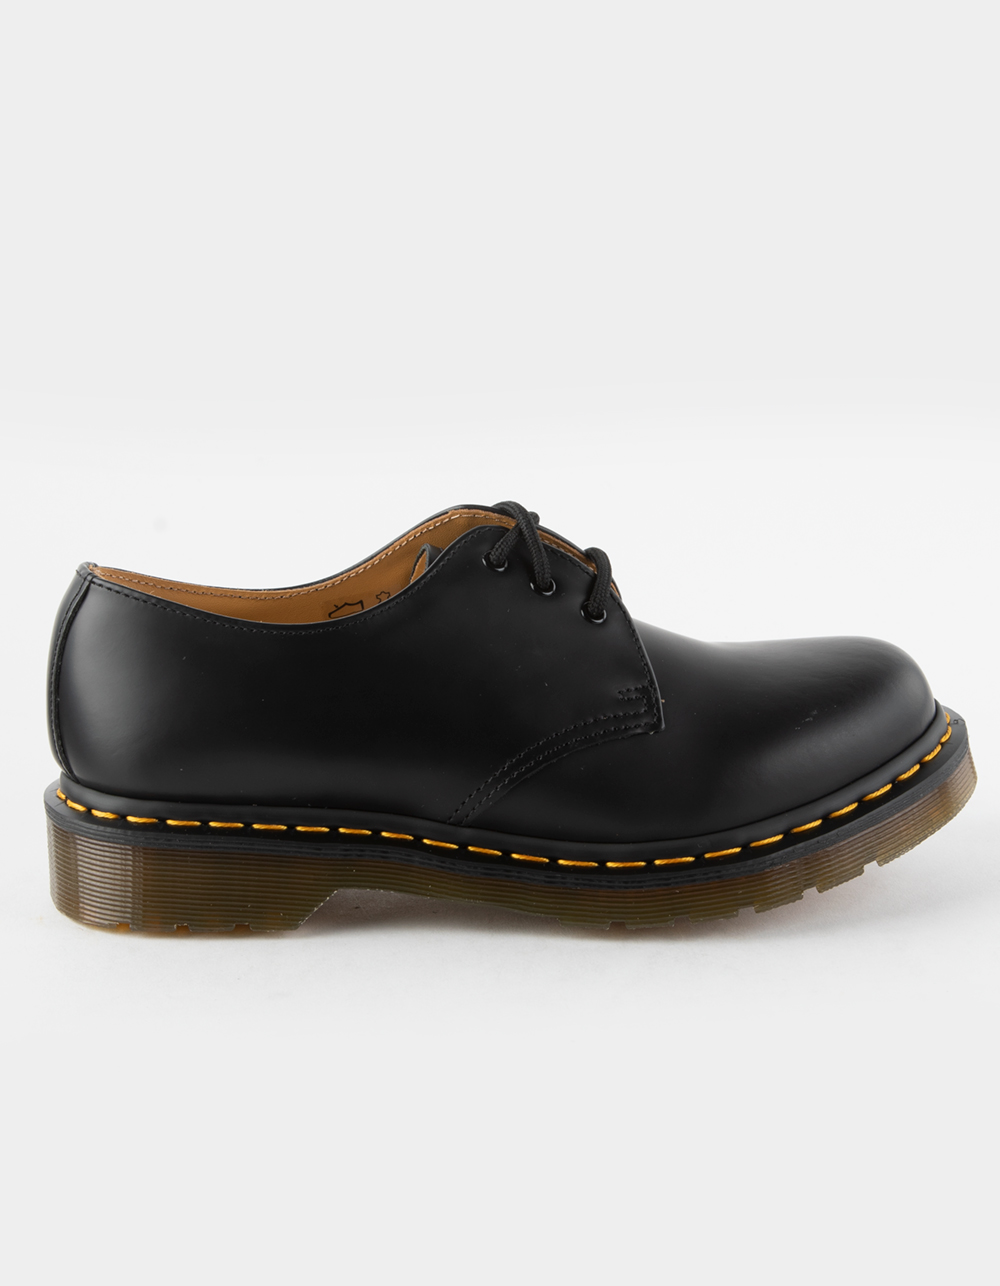 DR. MARTENS 1461 Womens Smooth Leather Oxford Shoes - BLACK | Tillys